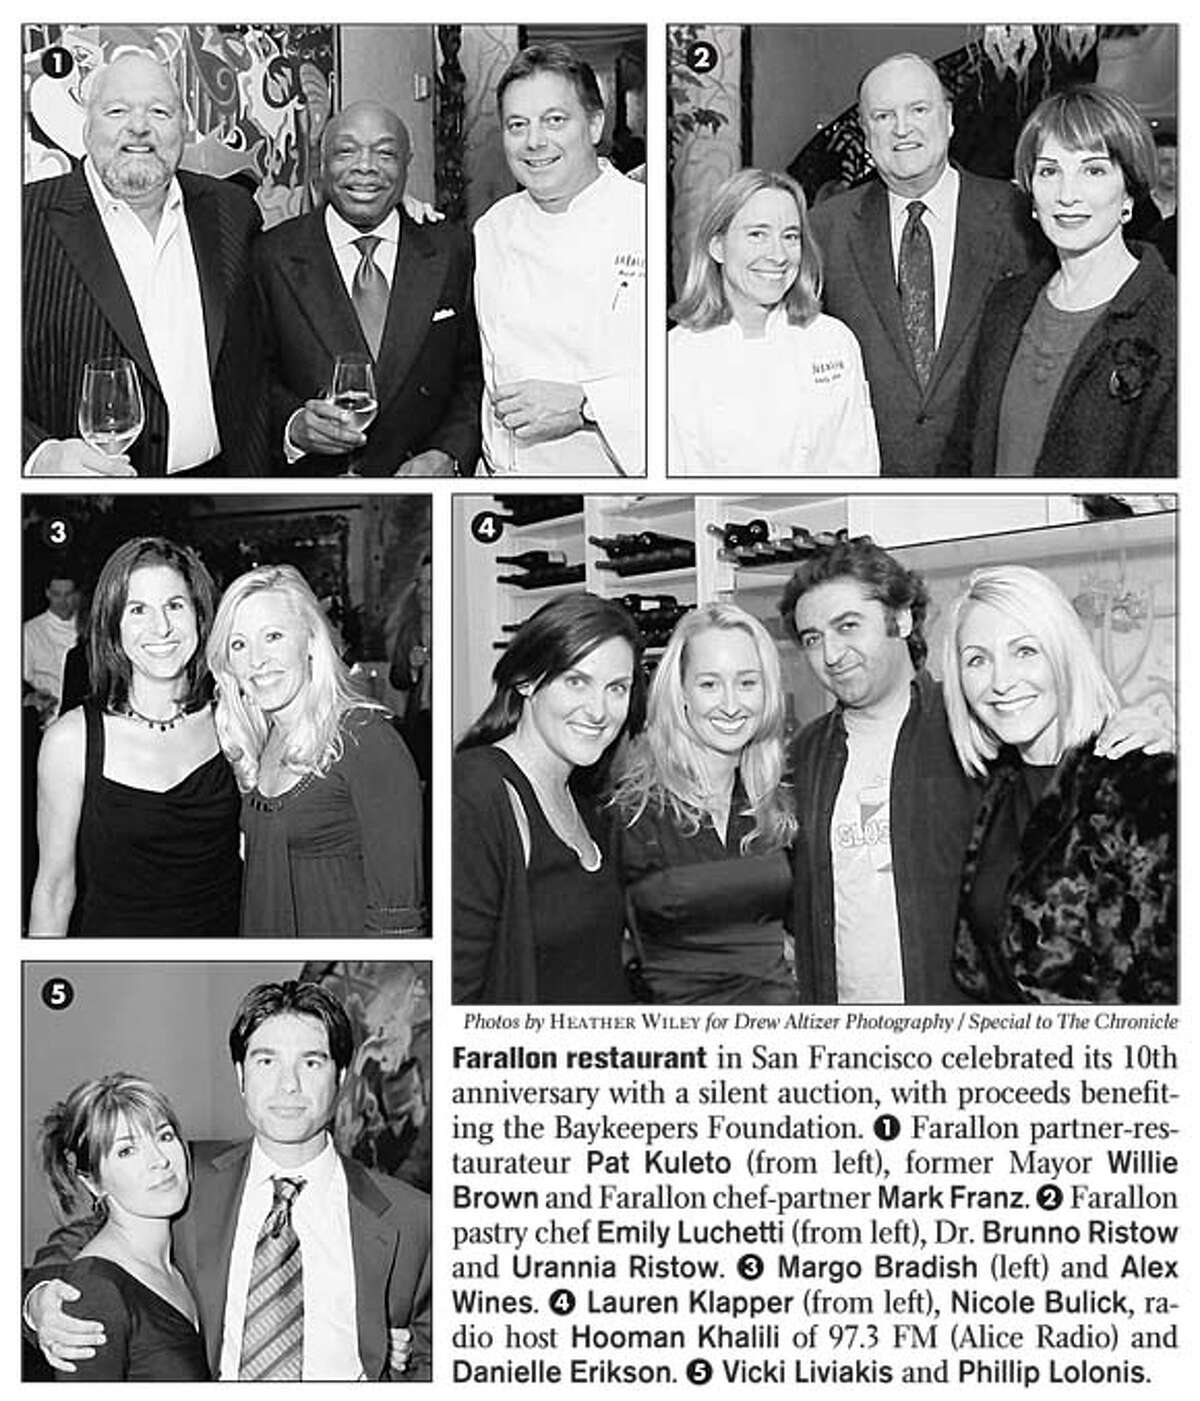 Farallon restaurant in San Francisco celebrated its 10th anniversary with a silent auction, with proceeds benefiting the Baykeepers Foundation. Photos by Heather Wiley for Drew Altizer Photography, special to the Chronicle